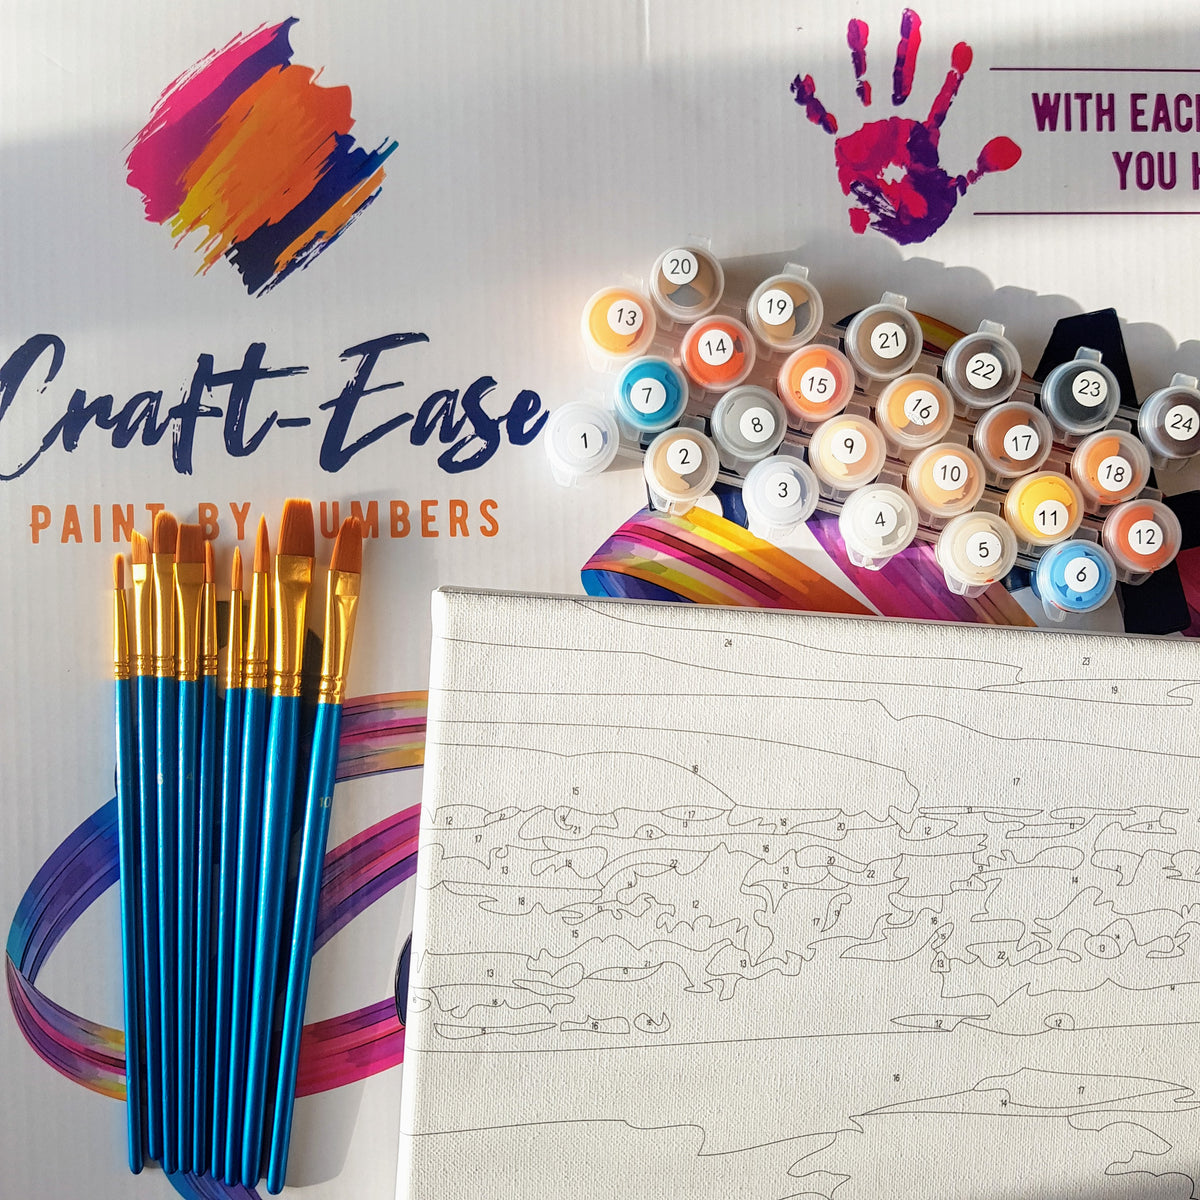 Craft-Ease Paint By Numbers - Funny